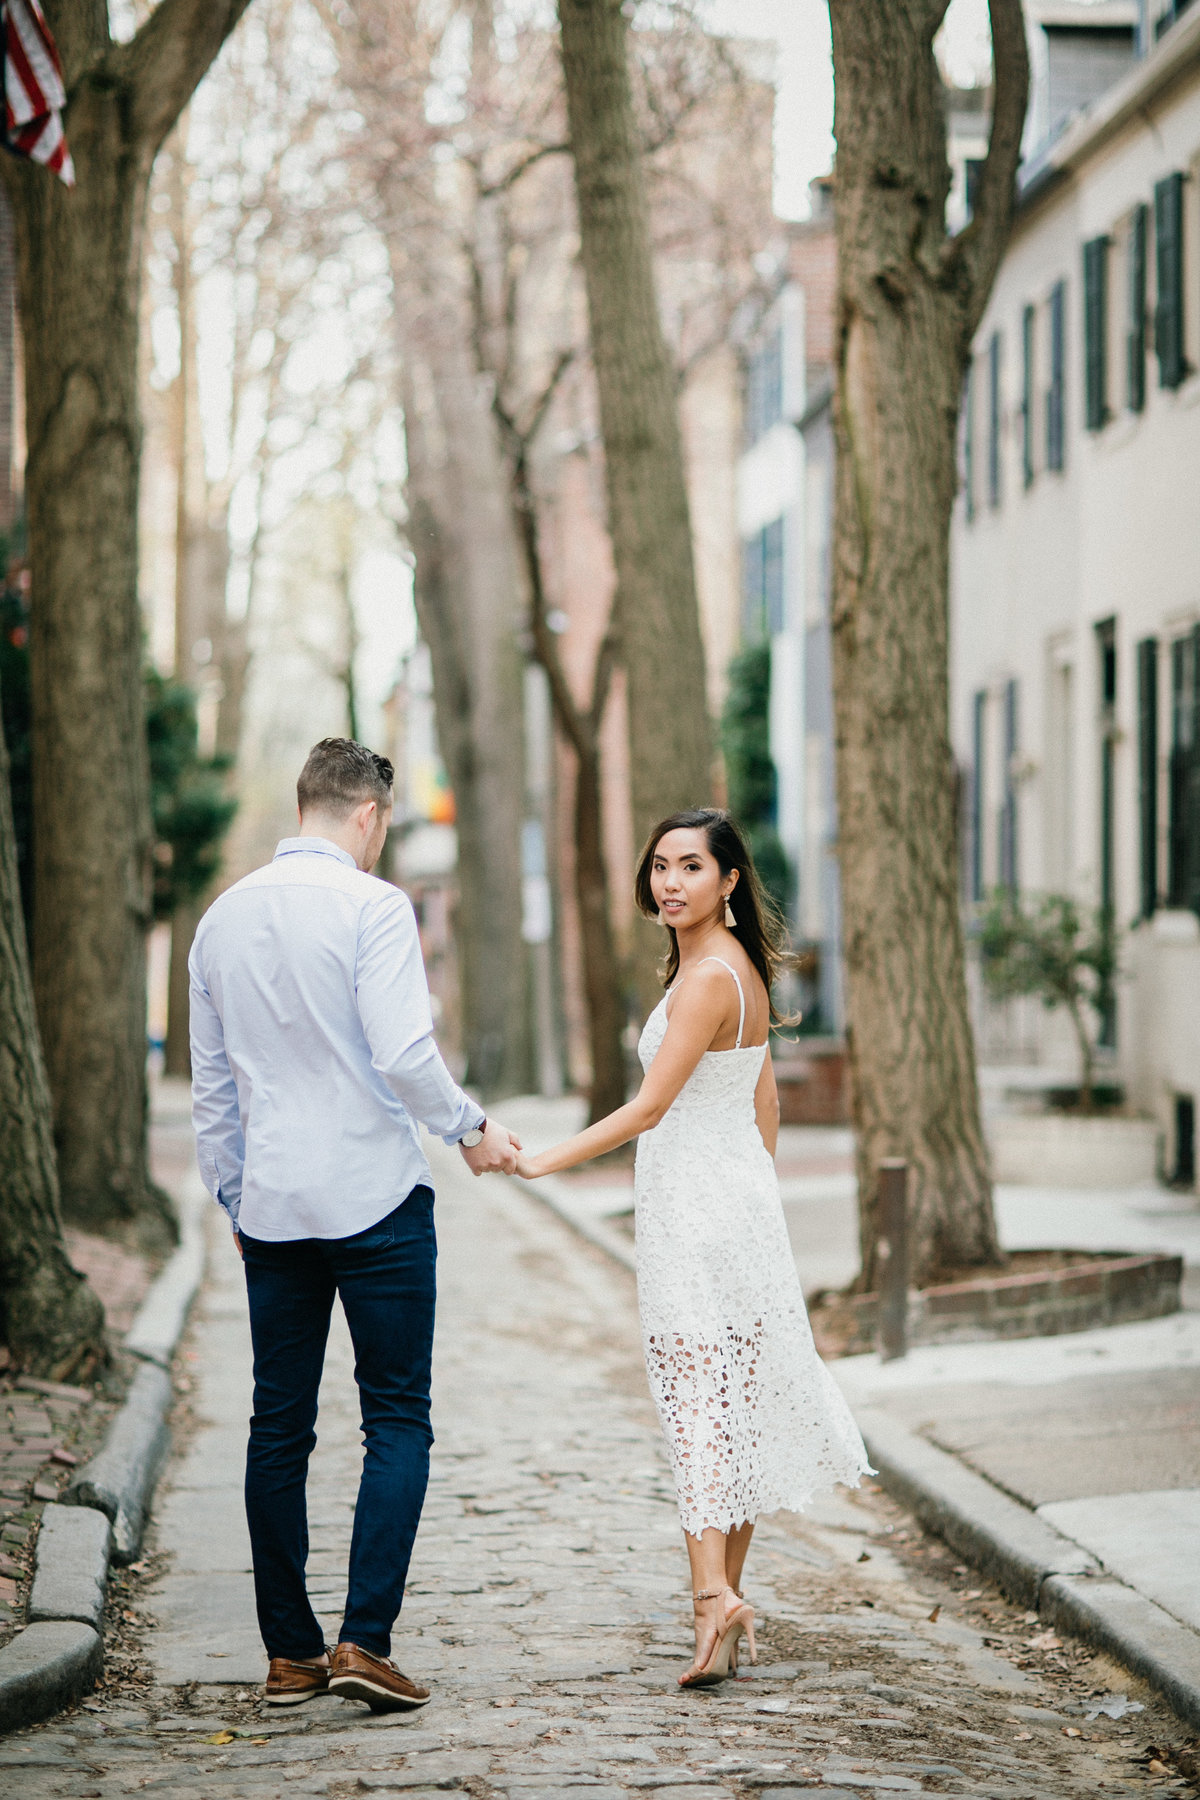 Old City, Philadelphia engagement session photographed by Sweetwater Portraits.